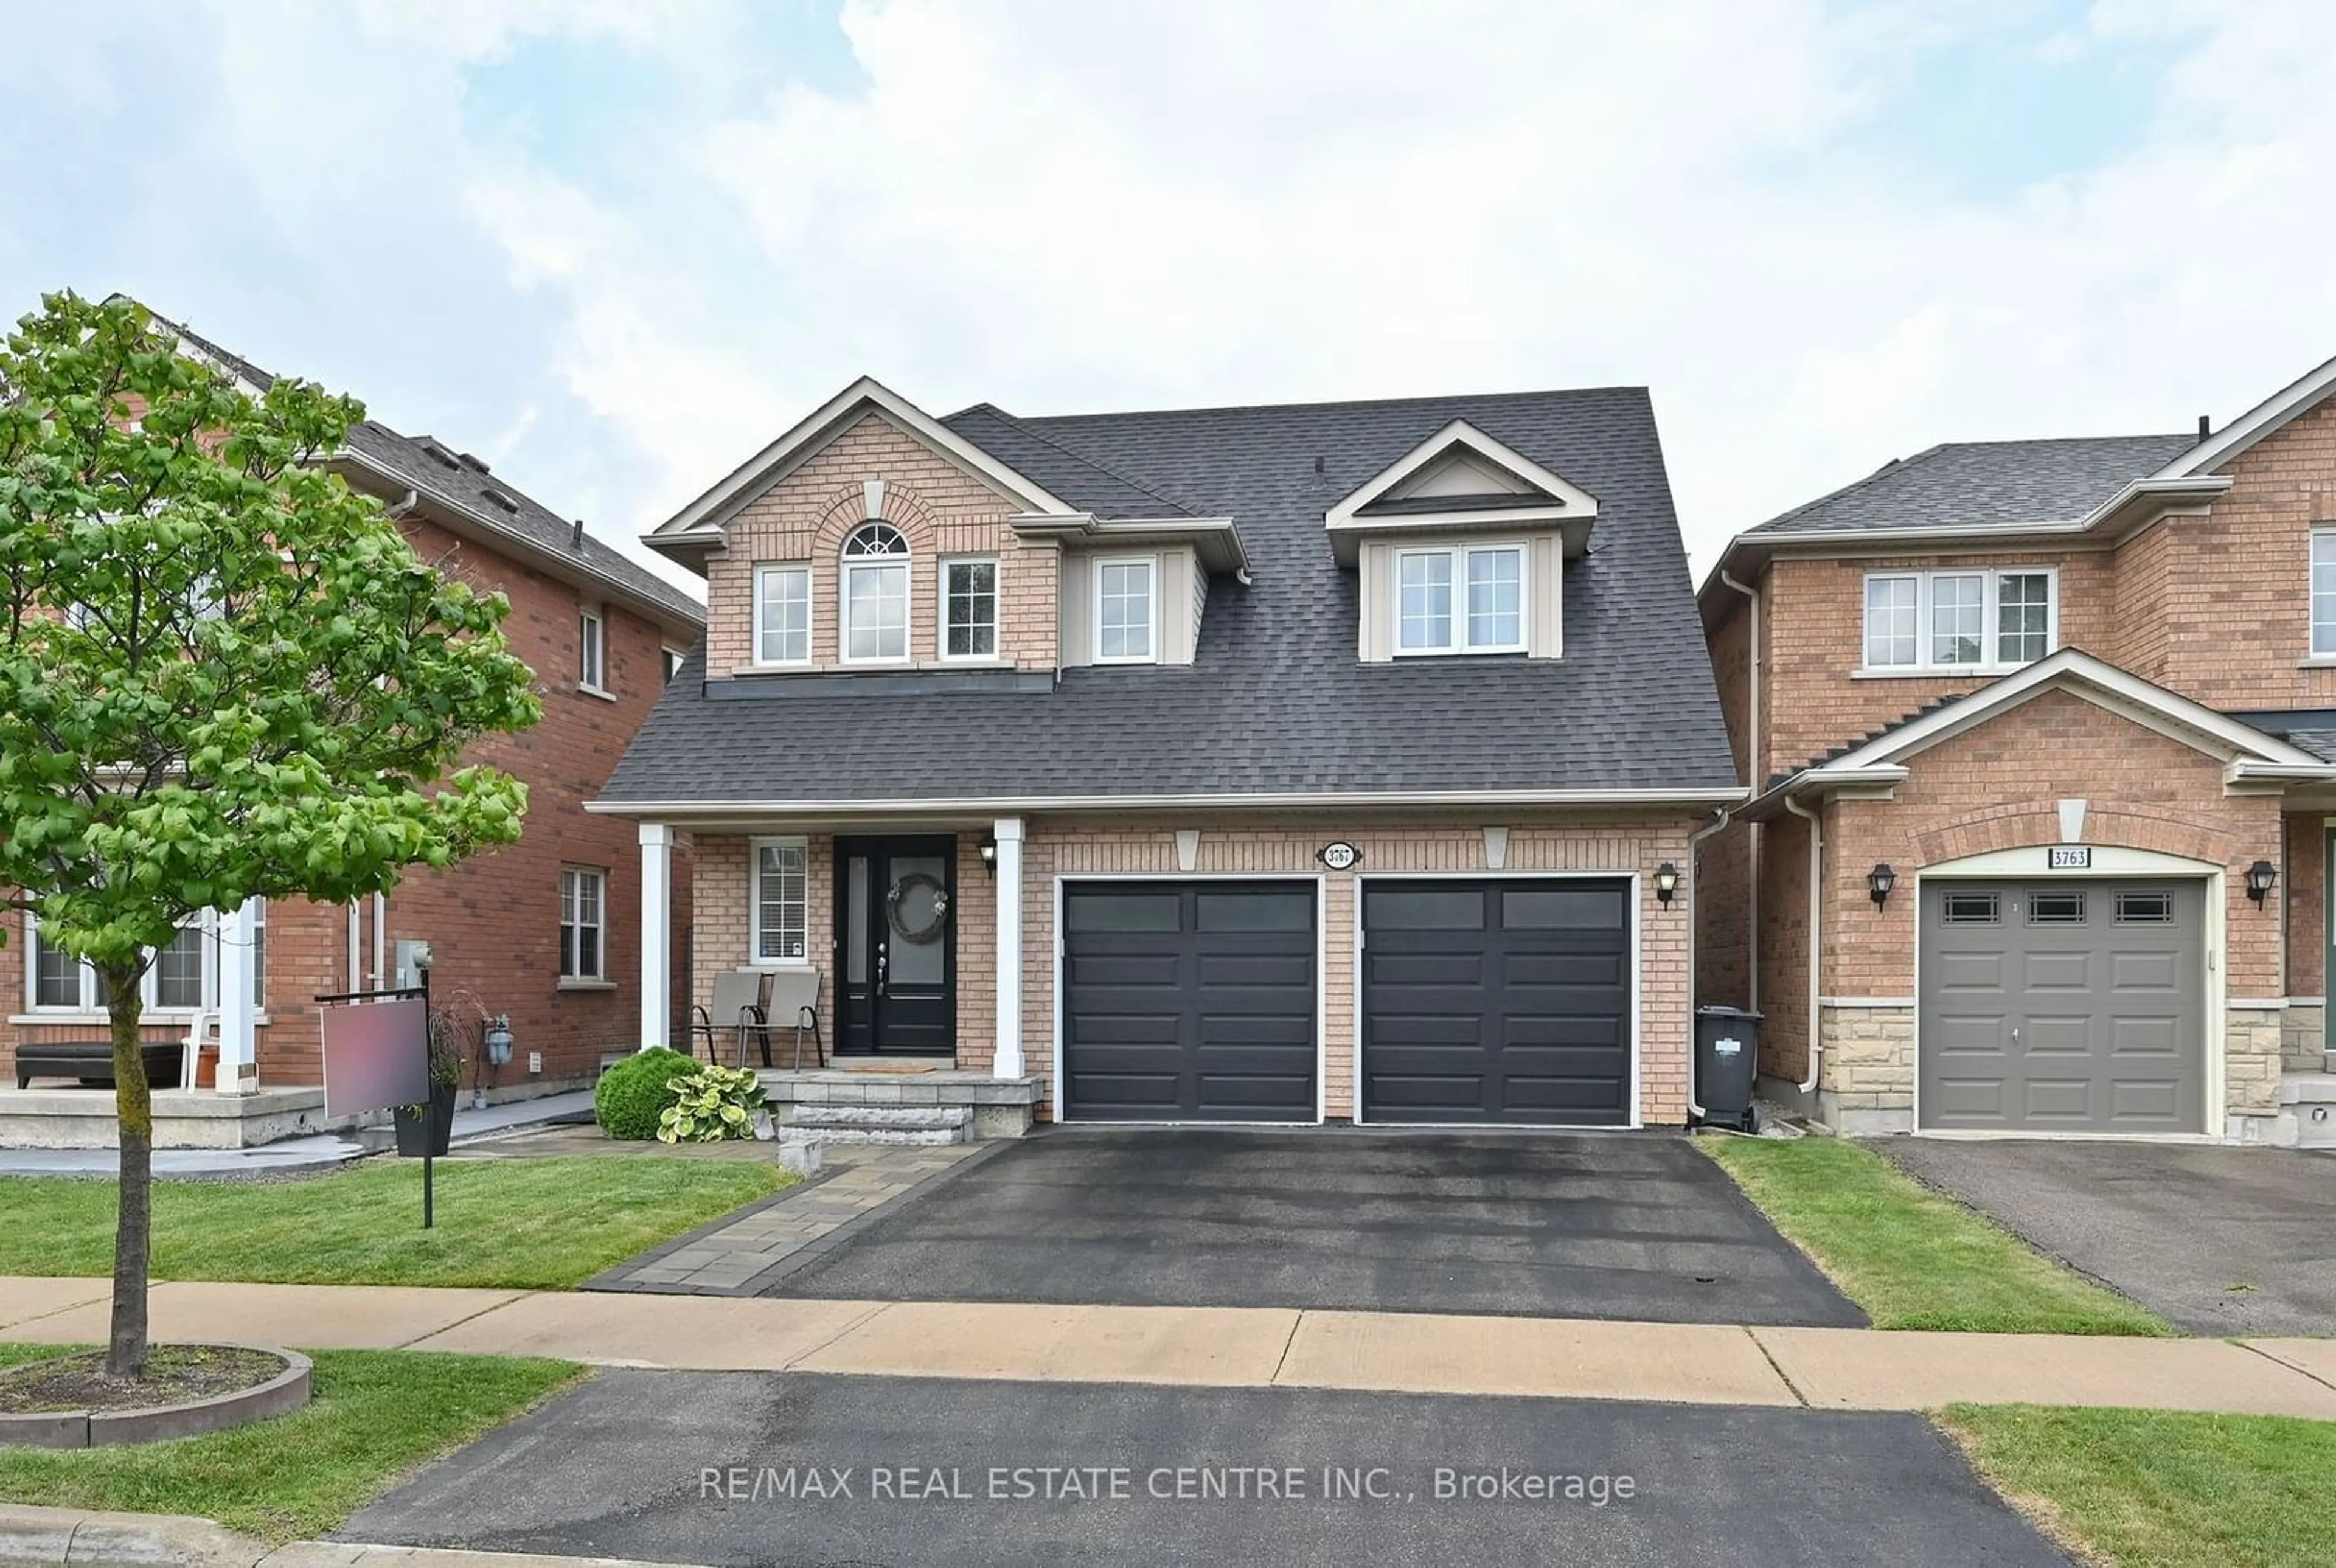 Home with brick exterior material for 3767 Pearlstone Dr, Mississauga Ontario L5M 7H1